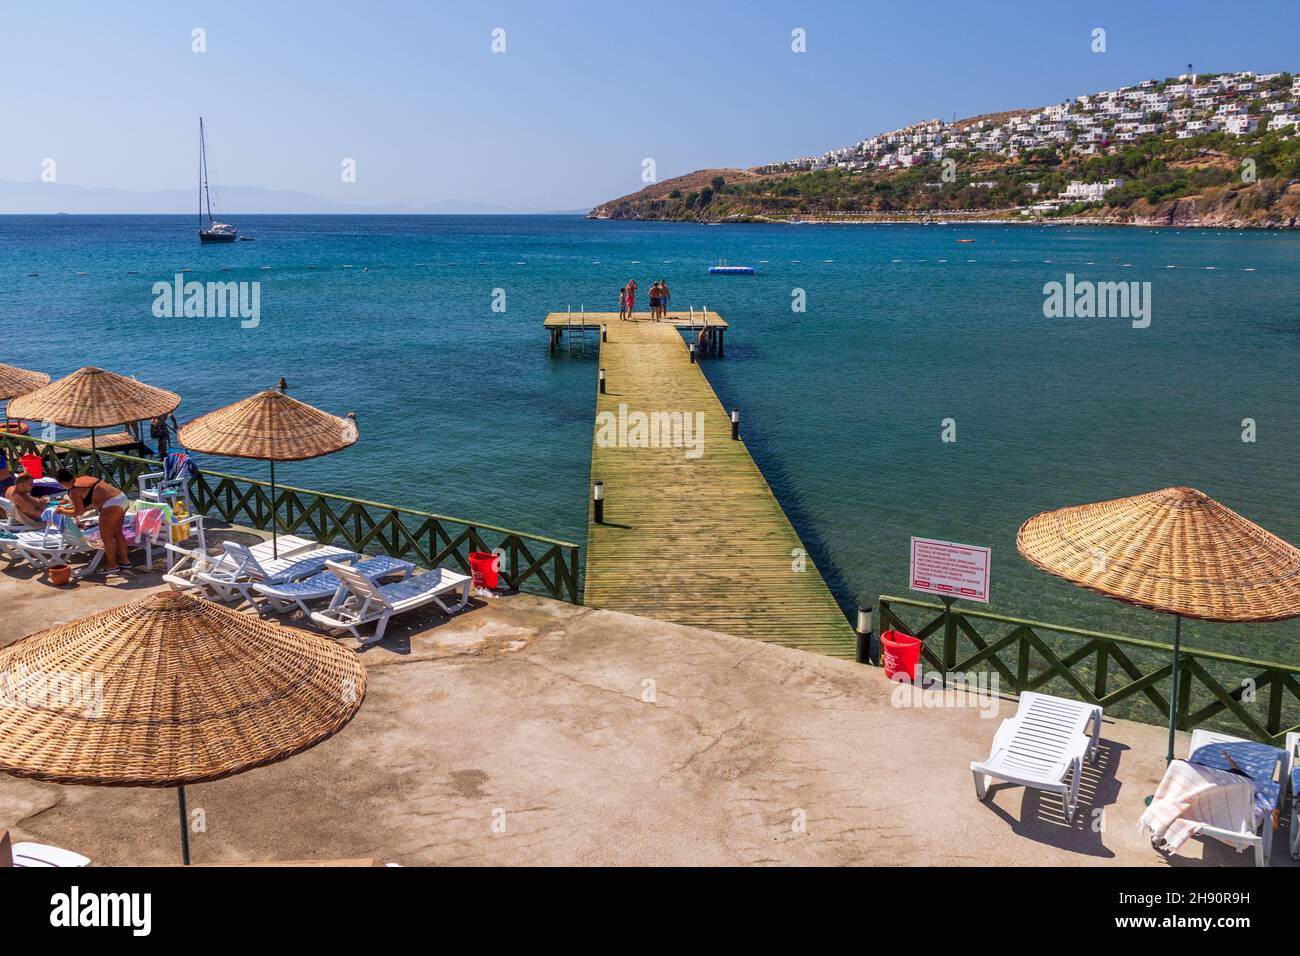 looking out overAegean sea near Bodrum,  with swimmers on jetty Stock Photo